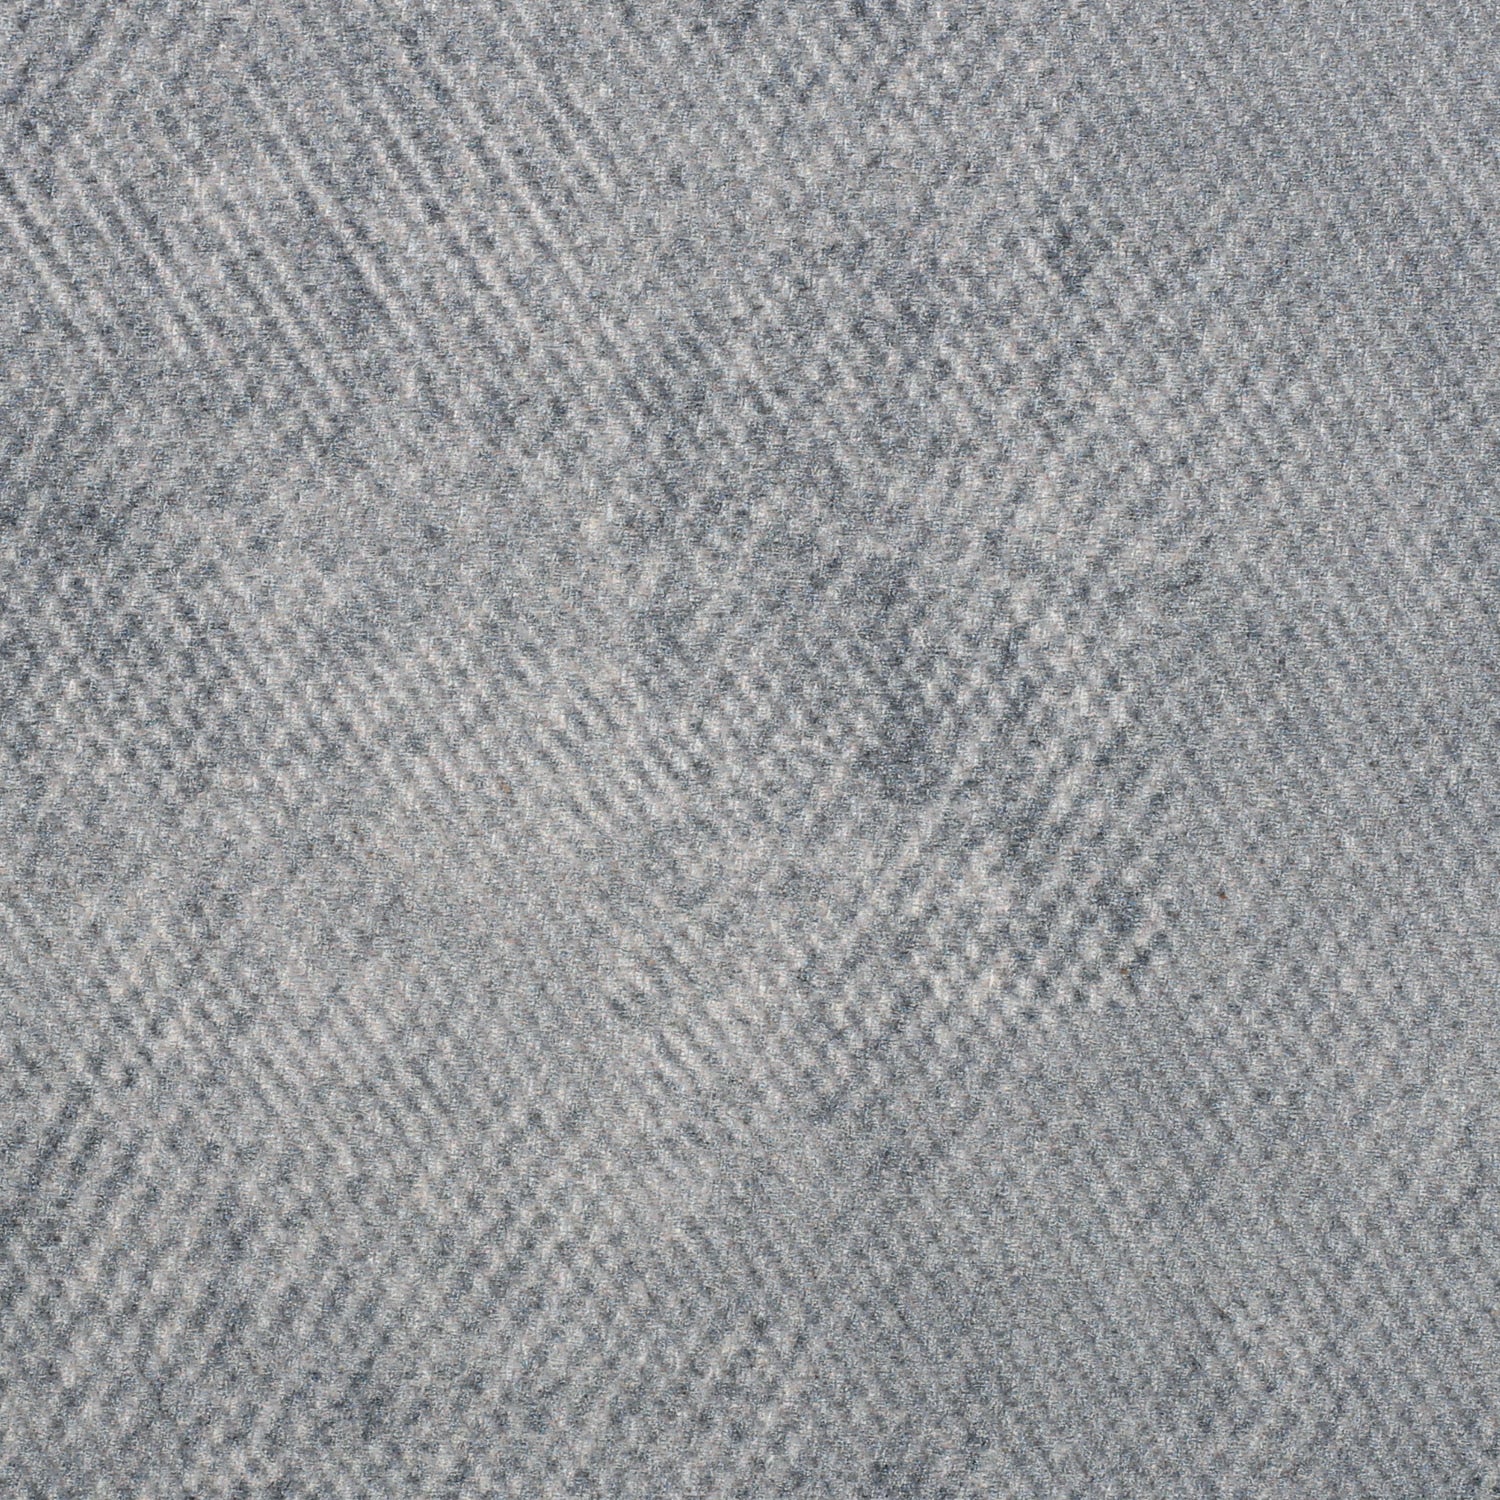 JEANS FABRIC